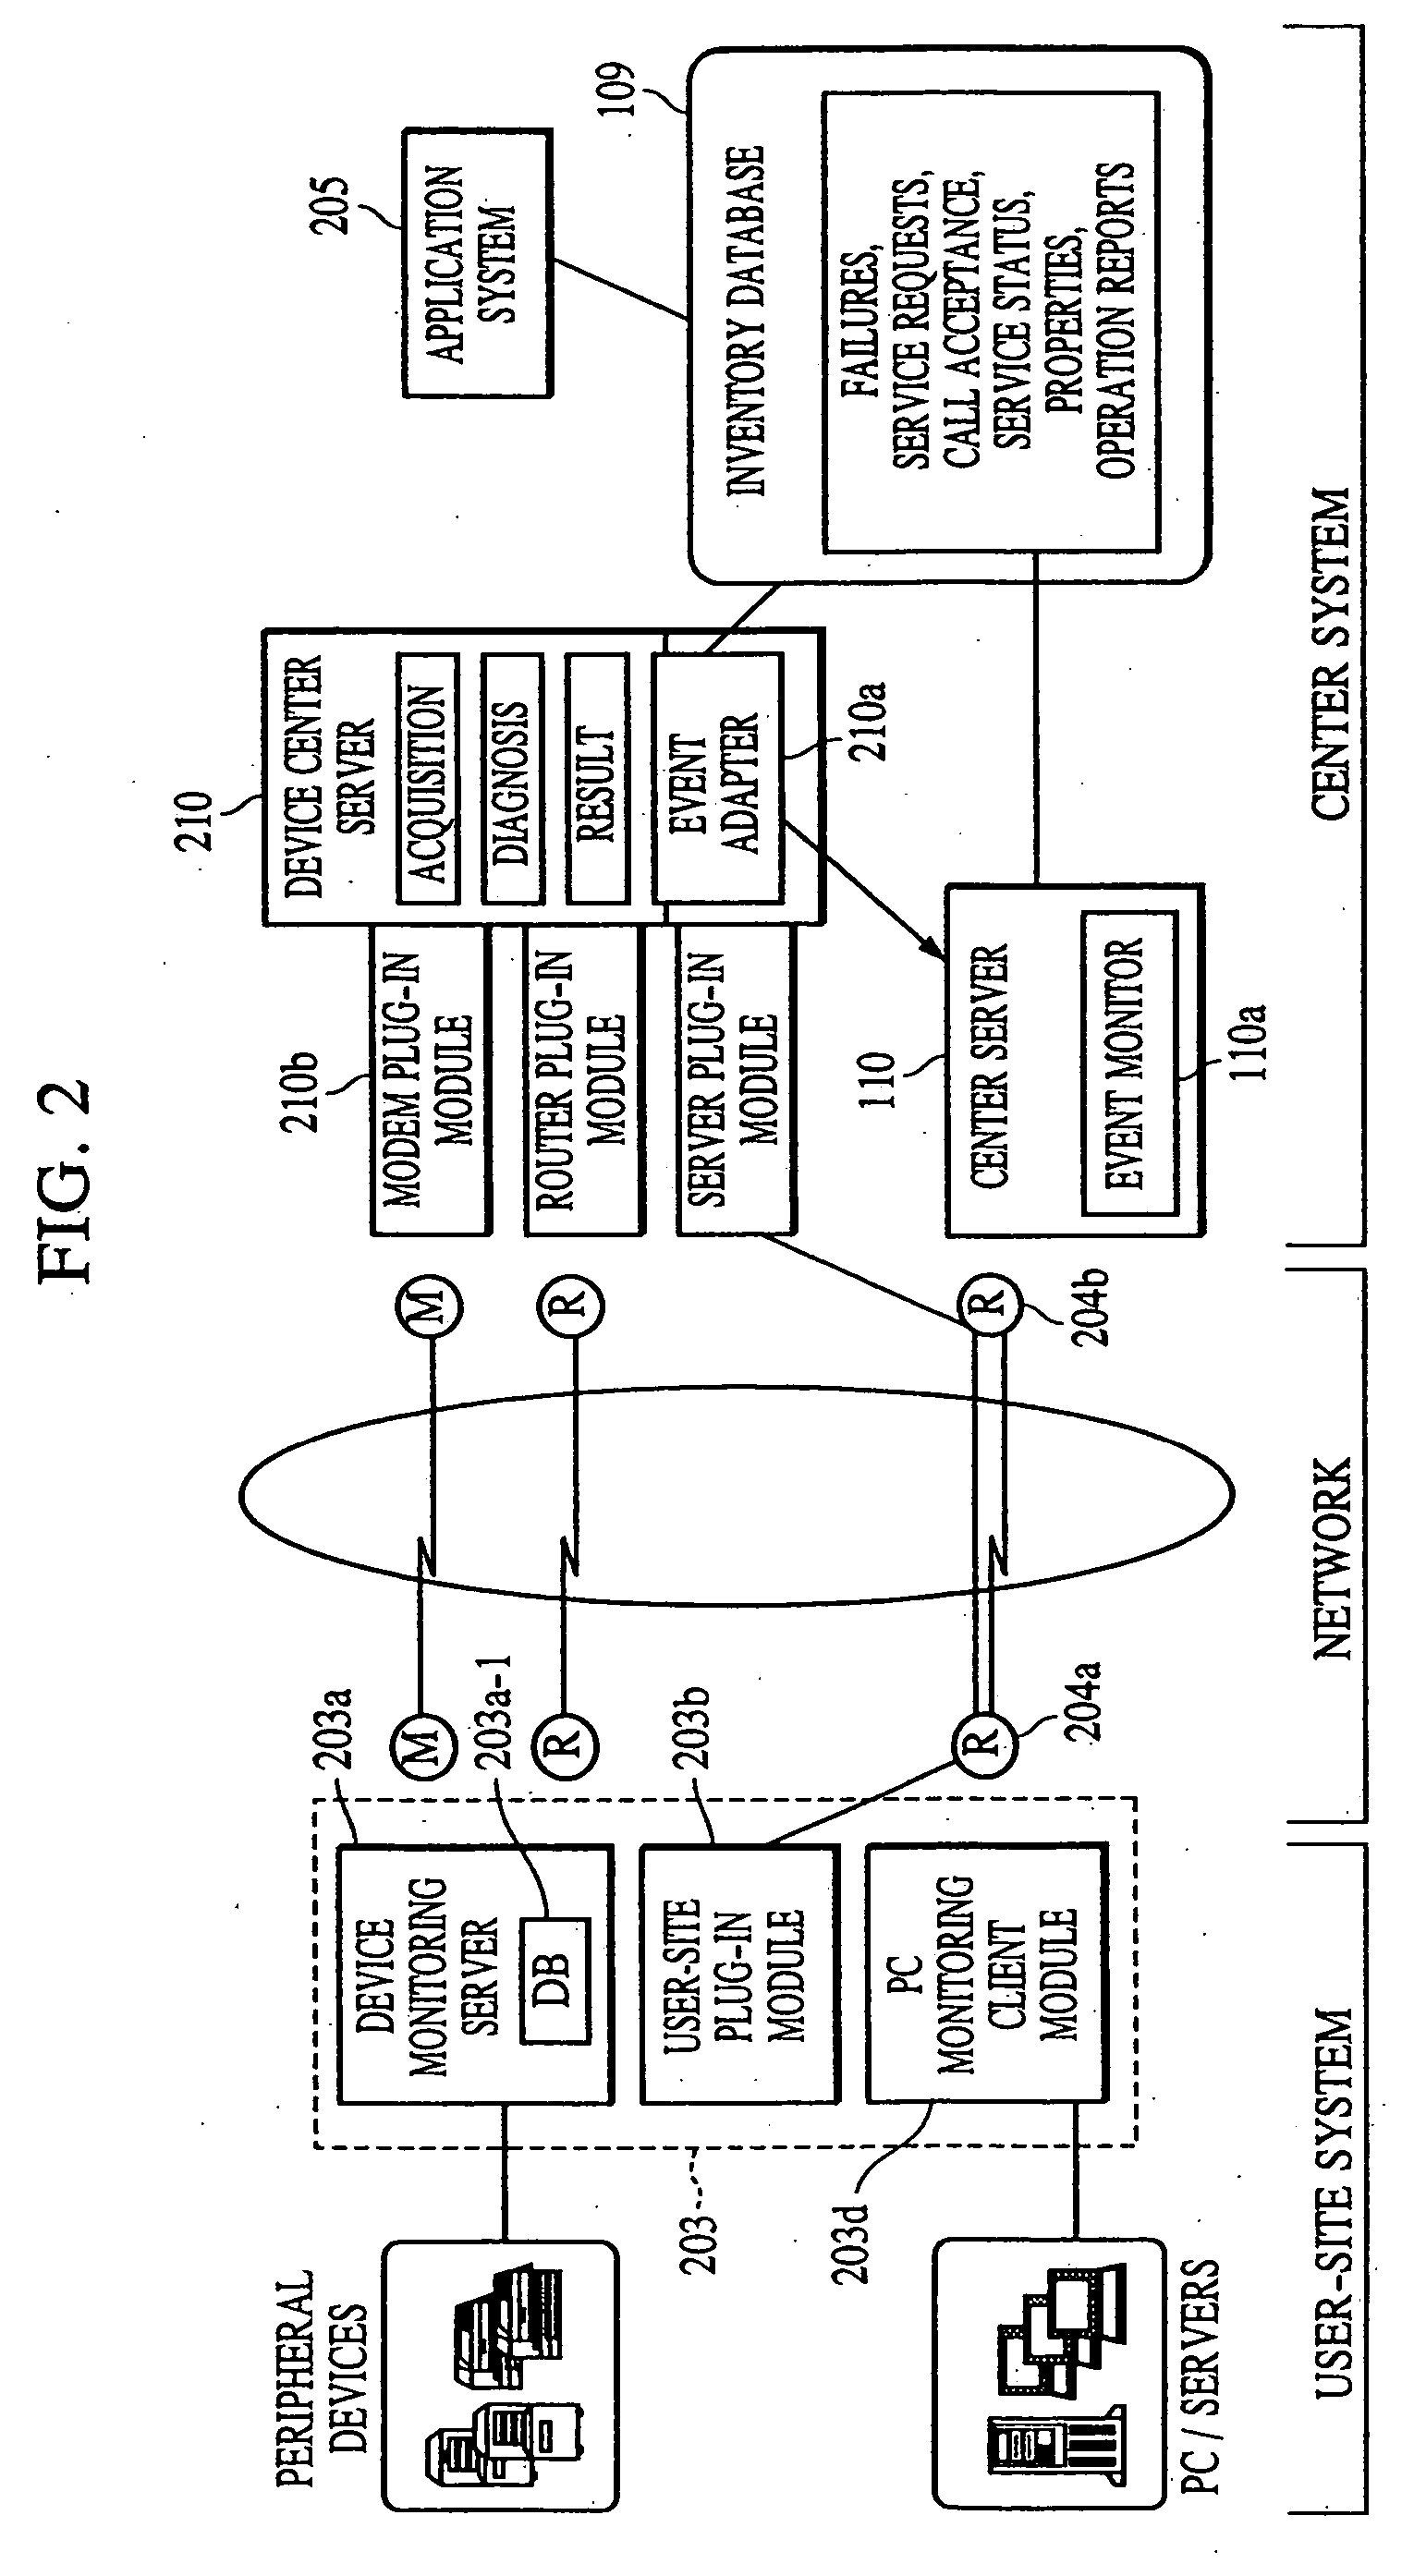 Apparatus for managing a device, program for managing a device, storage medium on which a program for managing a device is stored, and method of managing a device